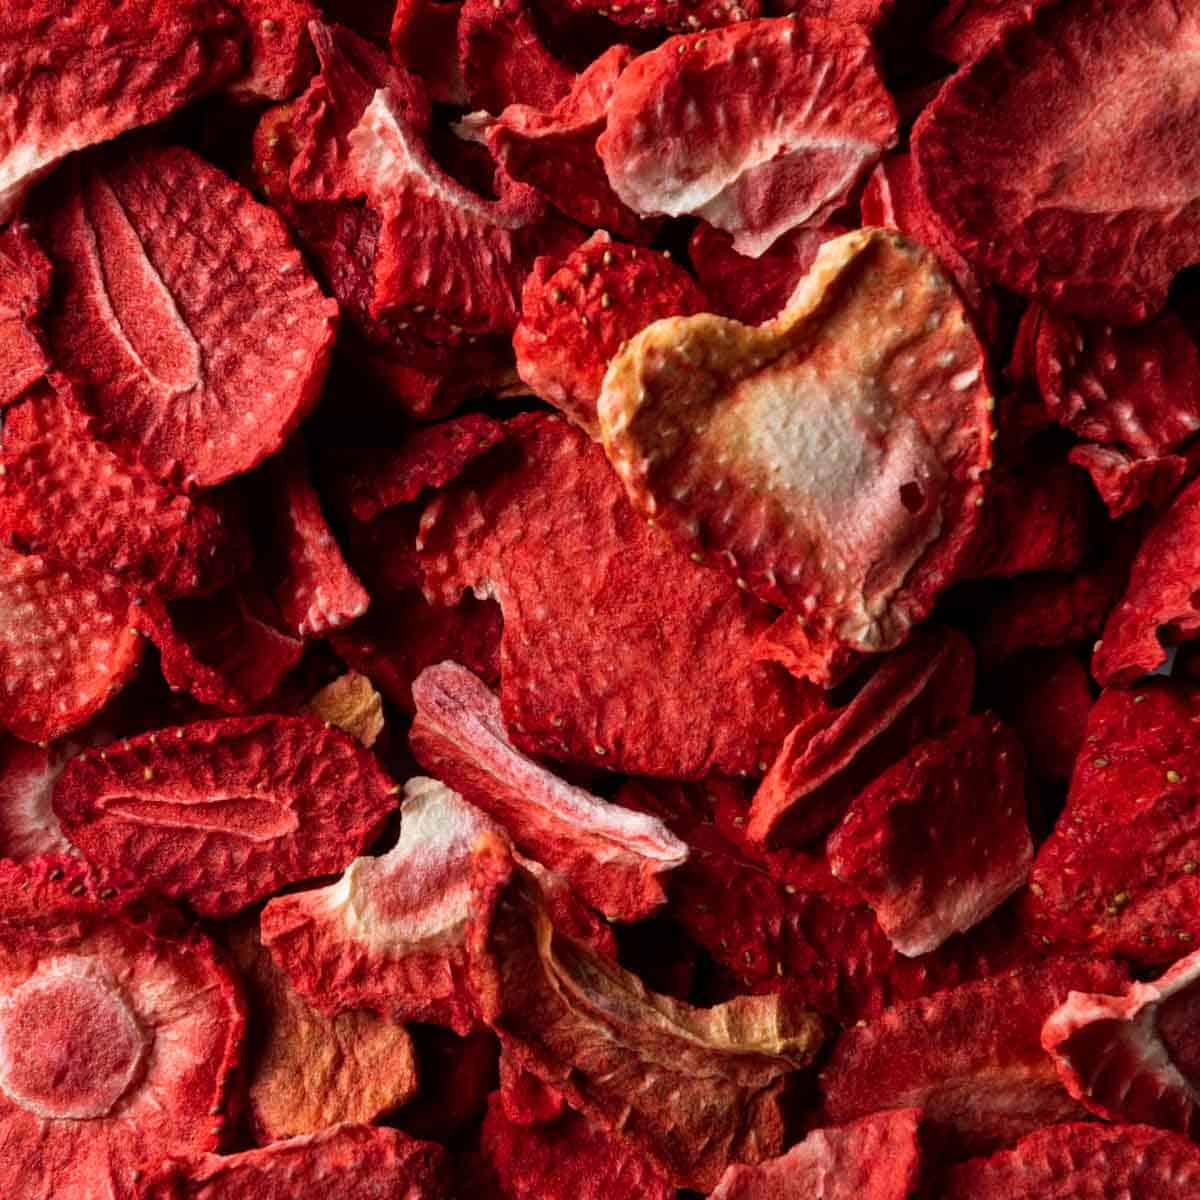 A close up shot of sliced freeze dried strawberries.